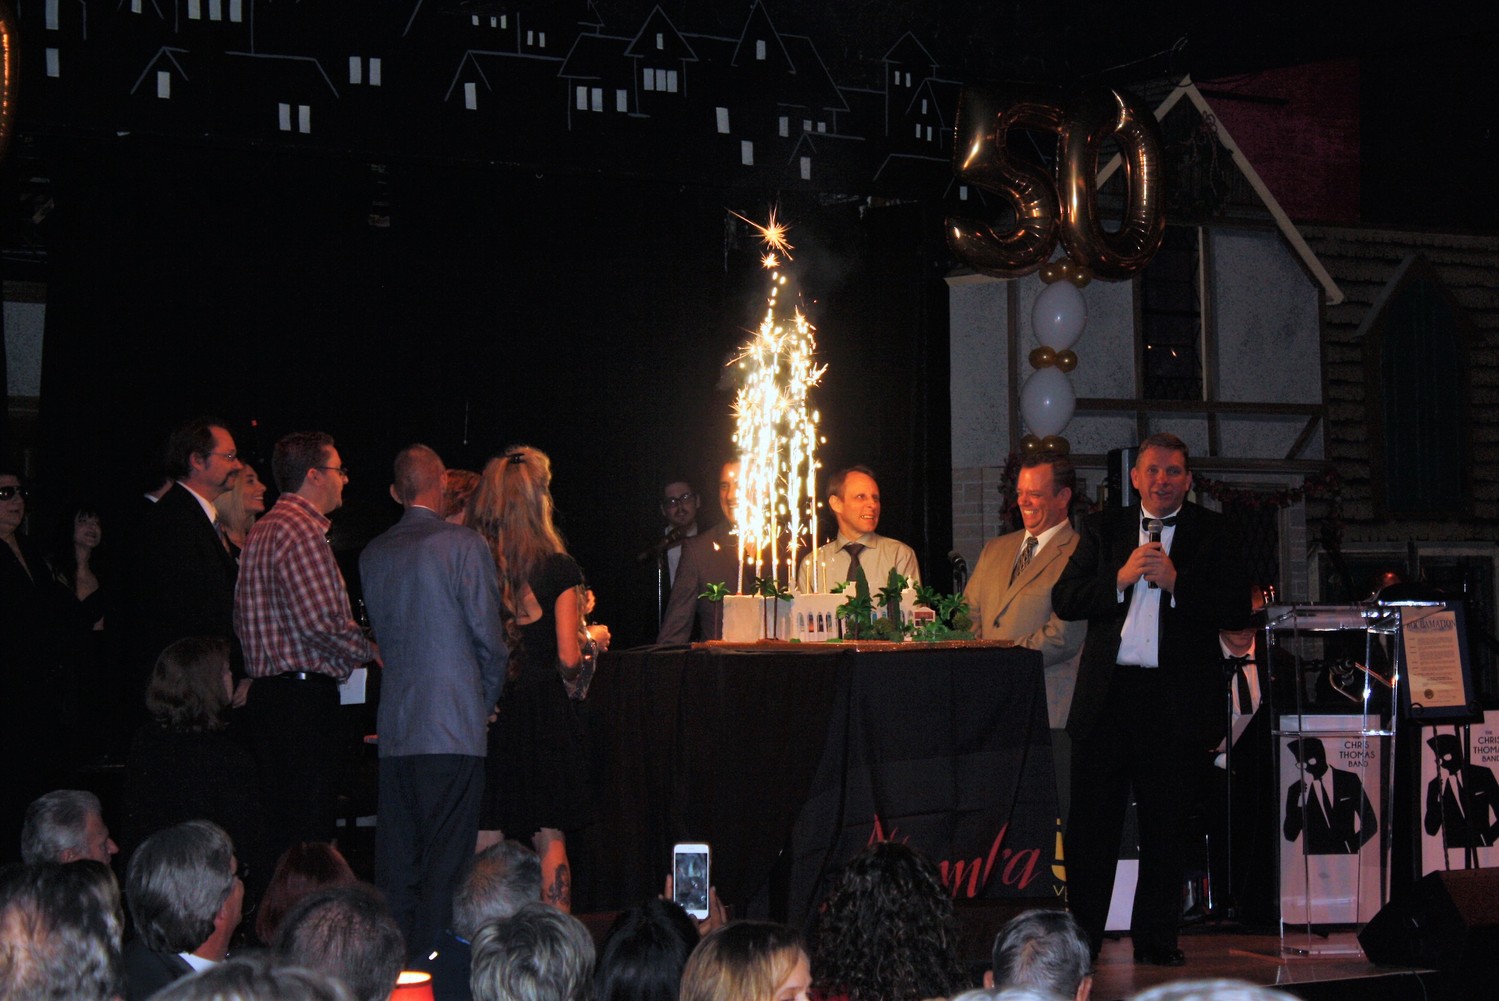 Alhambra staff gathers on stage to light the birthday cake's sparkler candles.